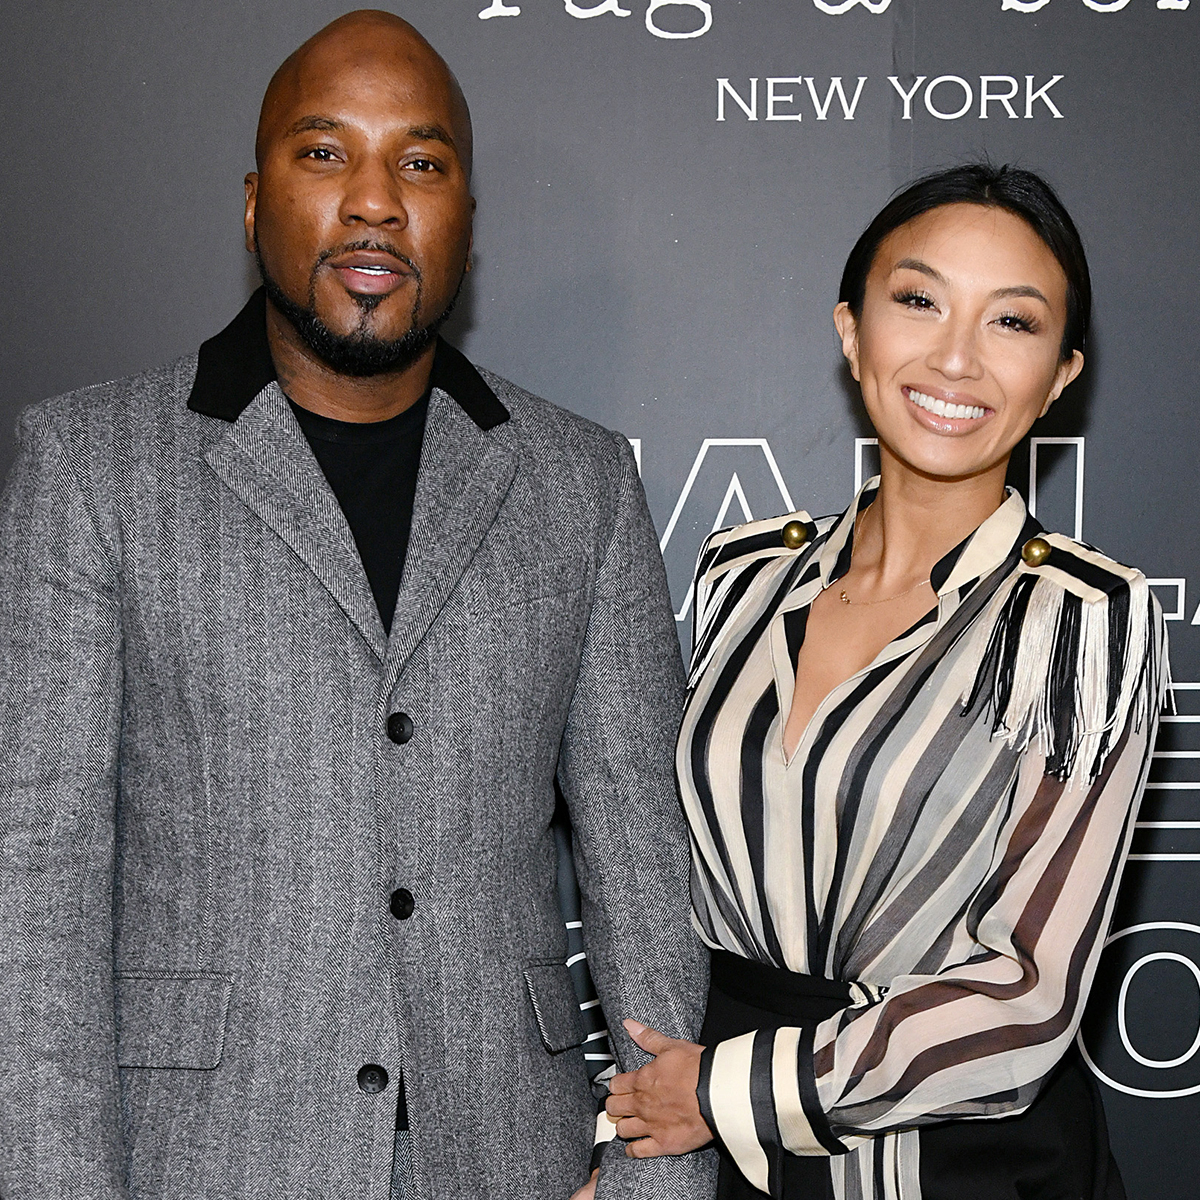 Jeannie Mai Introduces Her & Jeezy’s Baby Girl Five Months After Birth